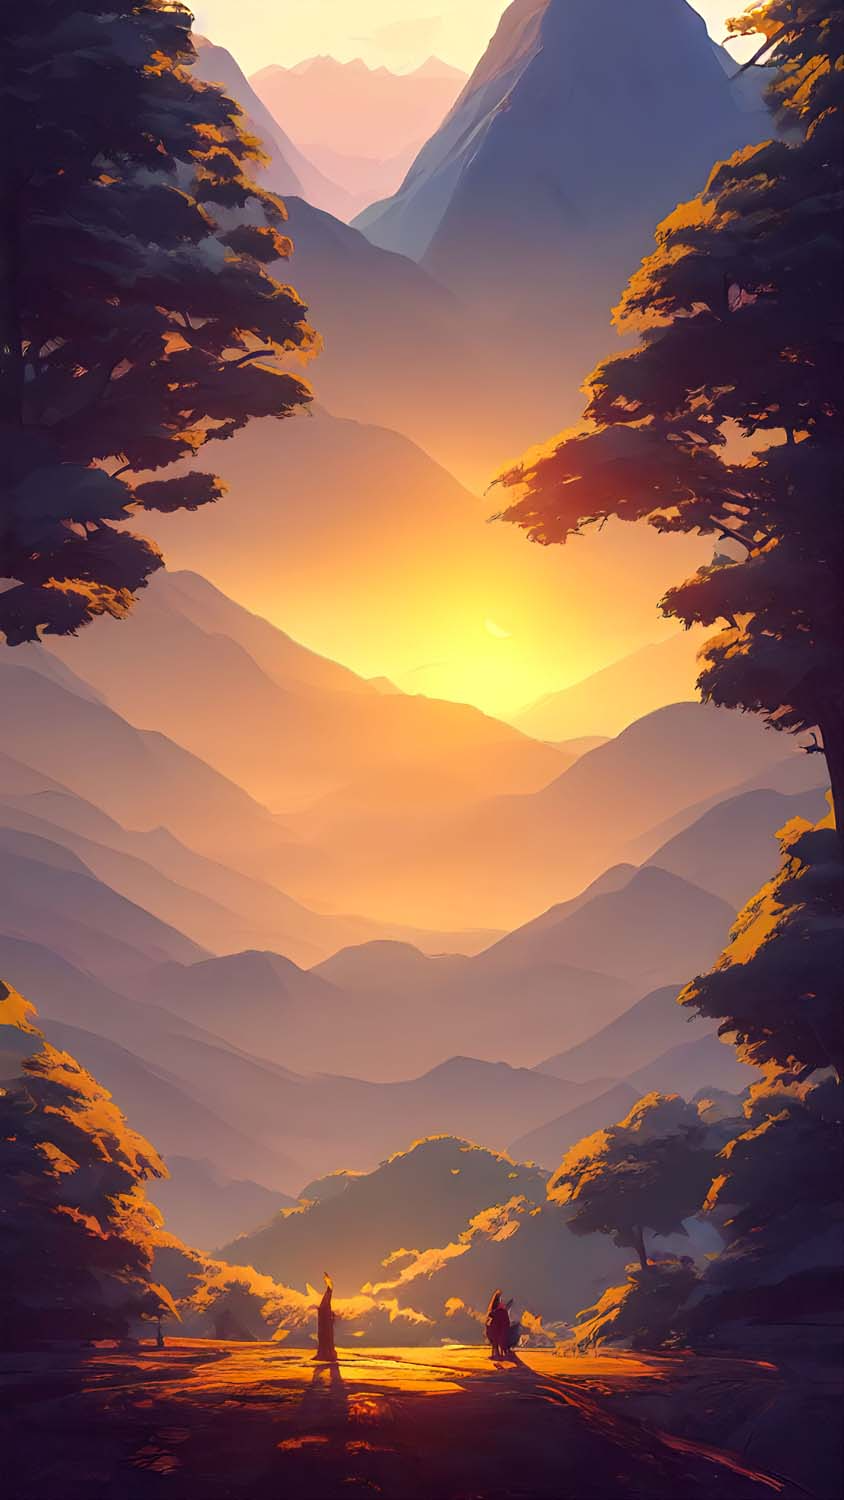 Sunshine From Mountains IPhone Wallpaper HD  IPhone Wallpapers